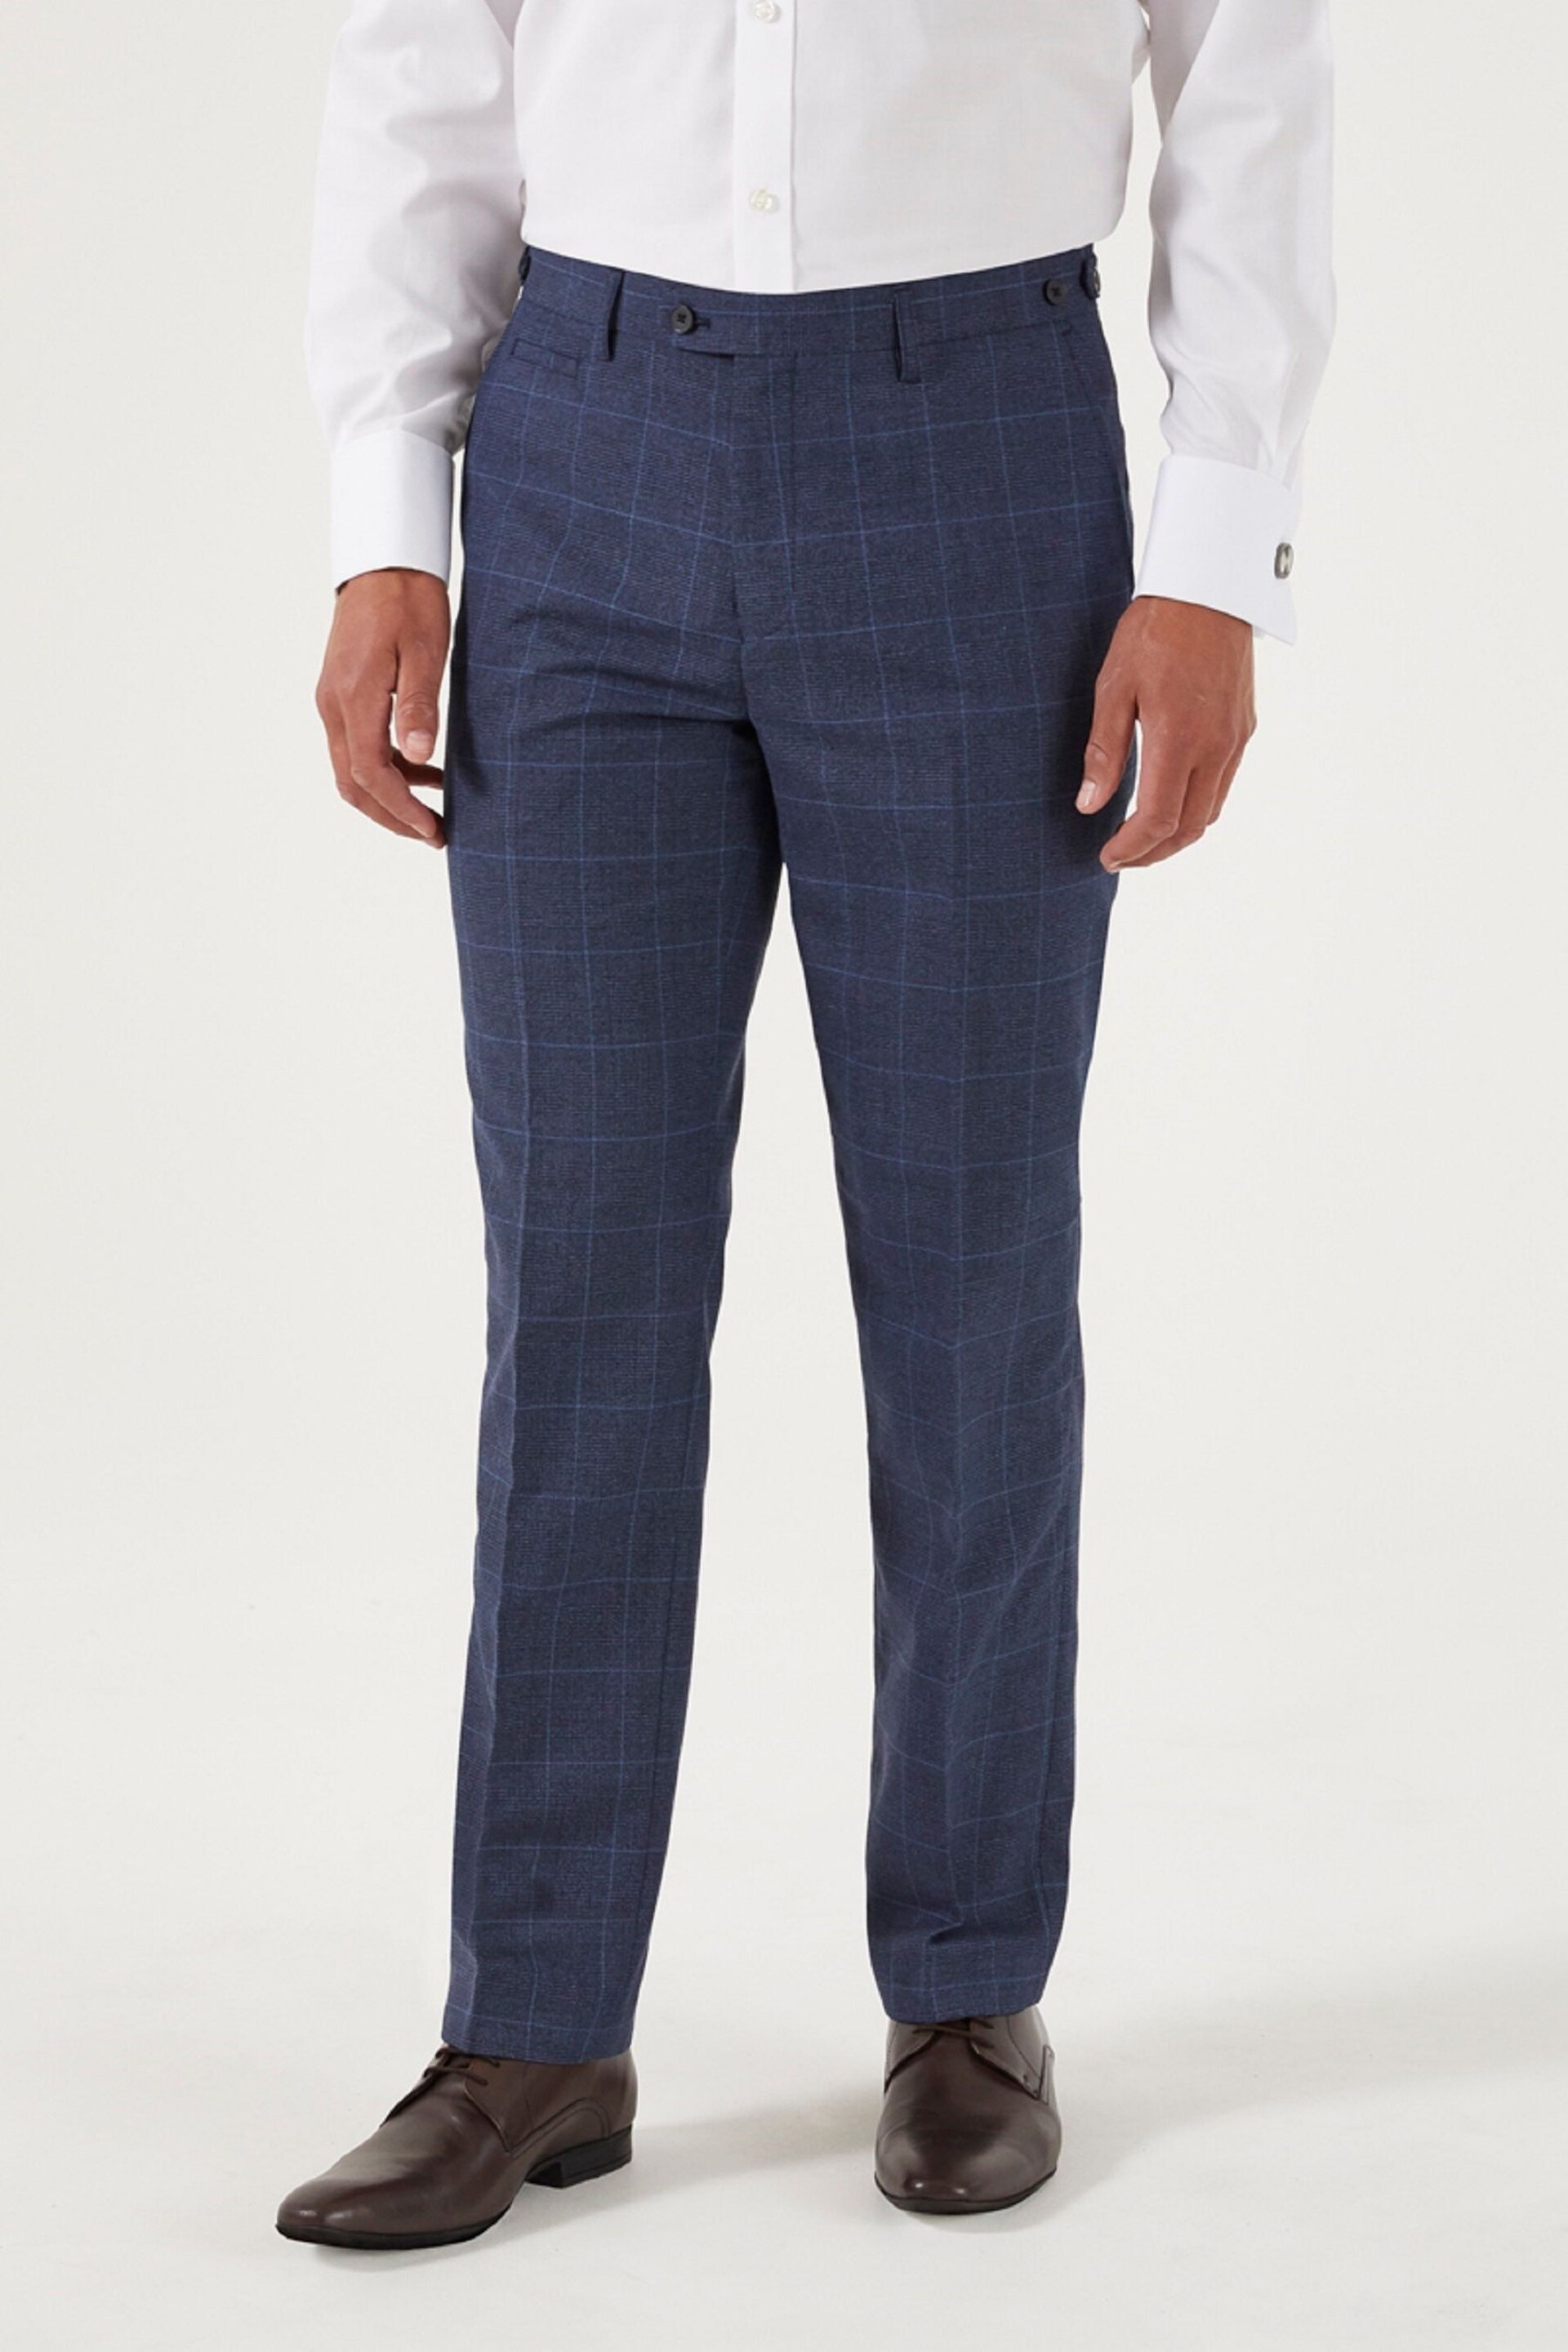 Skopes Anello Check Tailored Fit Suit Trousers - Image 1 of 3